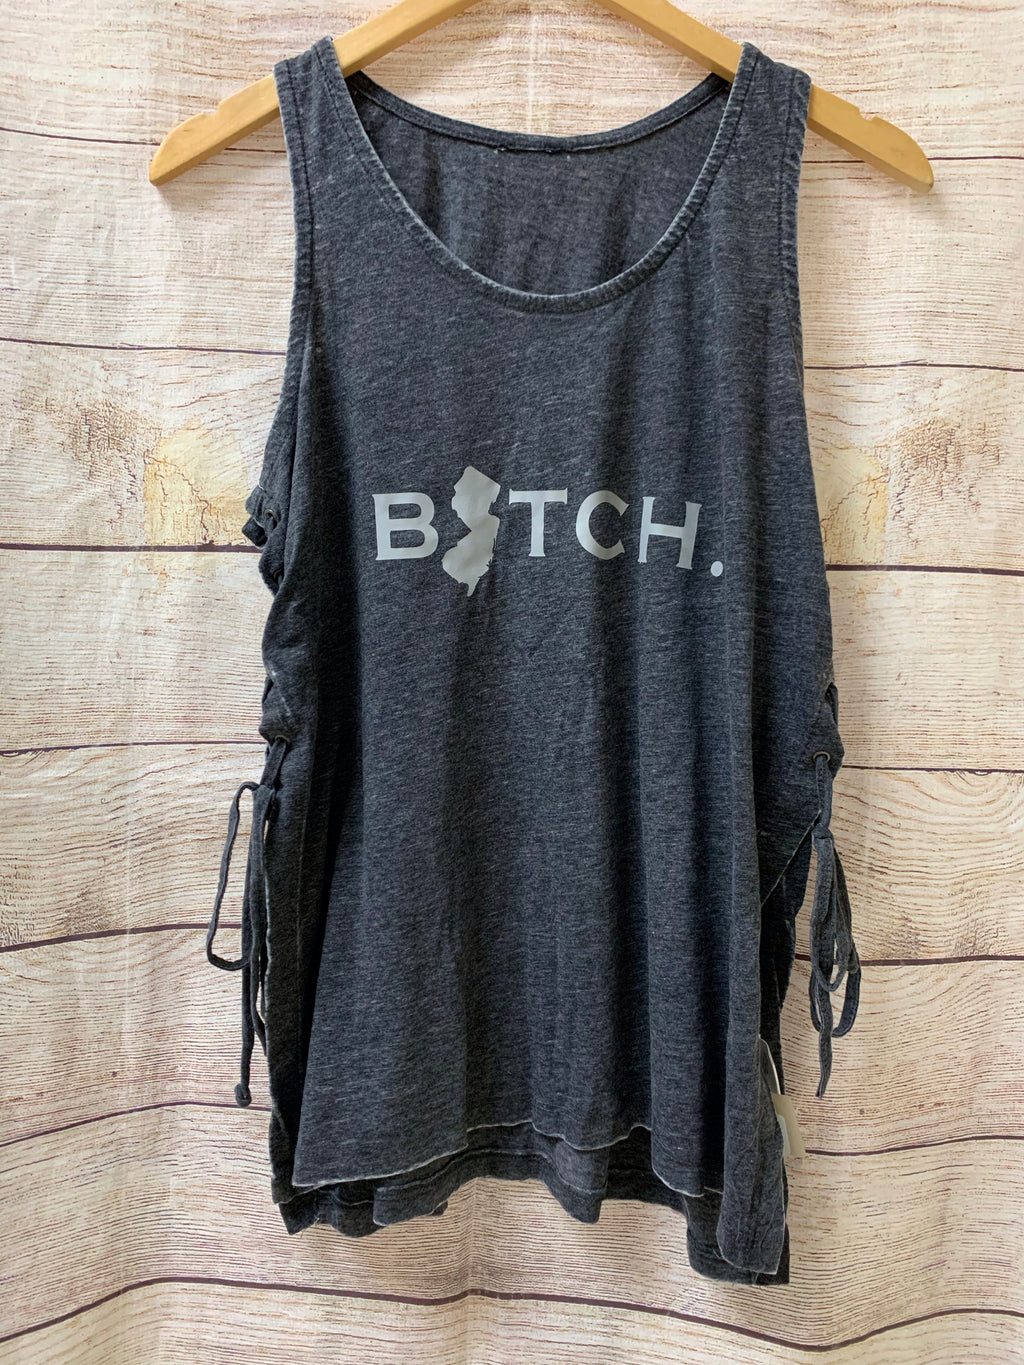 B*tch Tank With Lace Up Sides